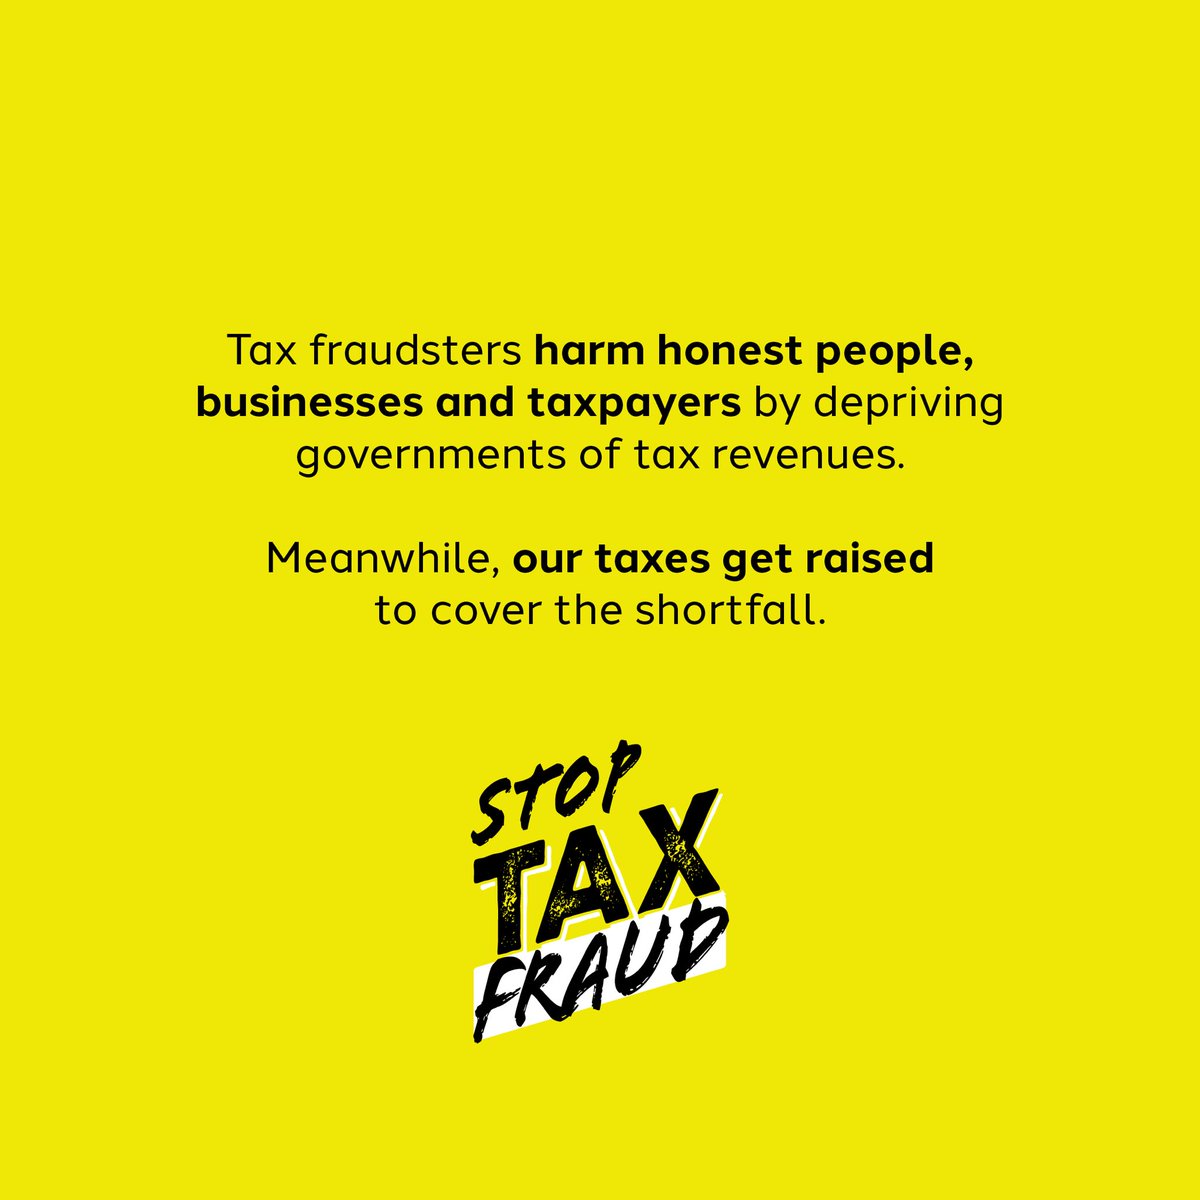 Are you aware of the impact of tax fraud? Join the UBC and its members from April 13–19 in our efforts to eradicate construction industry tax fraud through impactful events and initiatives. Visit StopTaxFraud.ca for more info. #askyourselfwhy #TFDOA2024 #stoptaxfraud